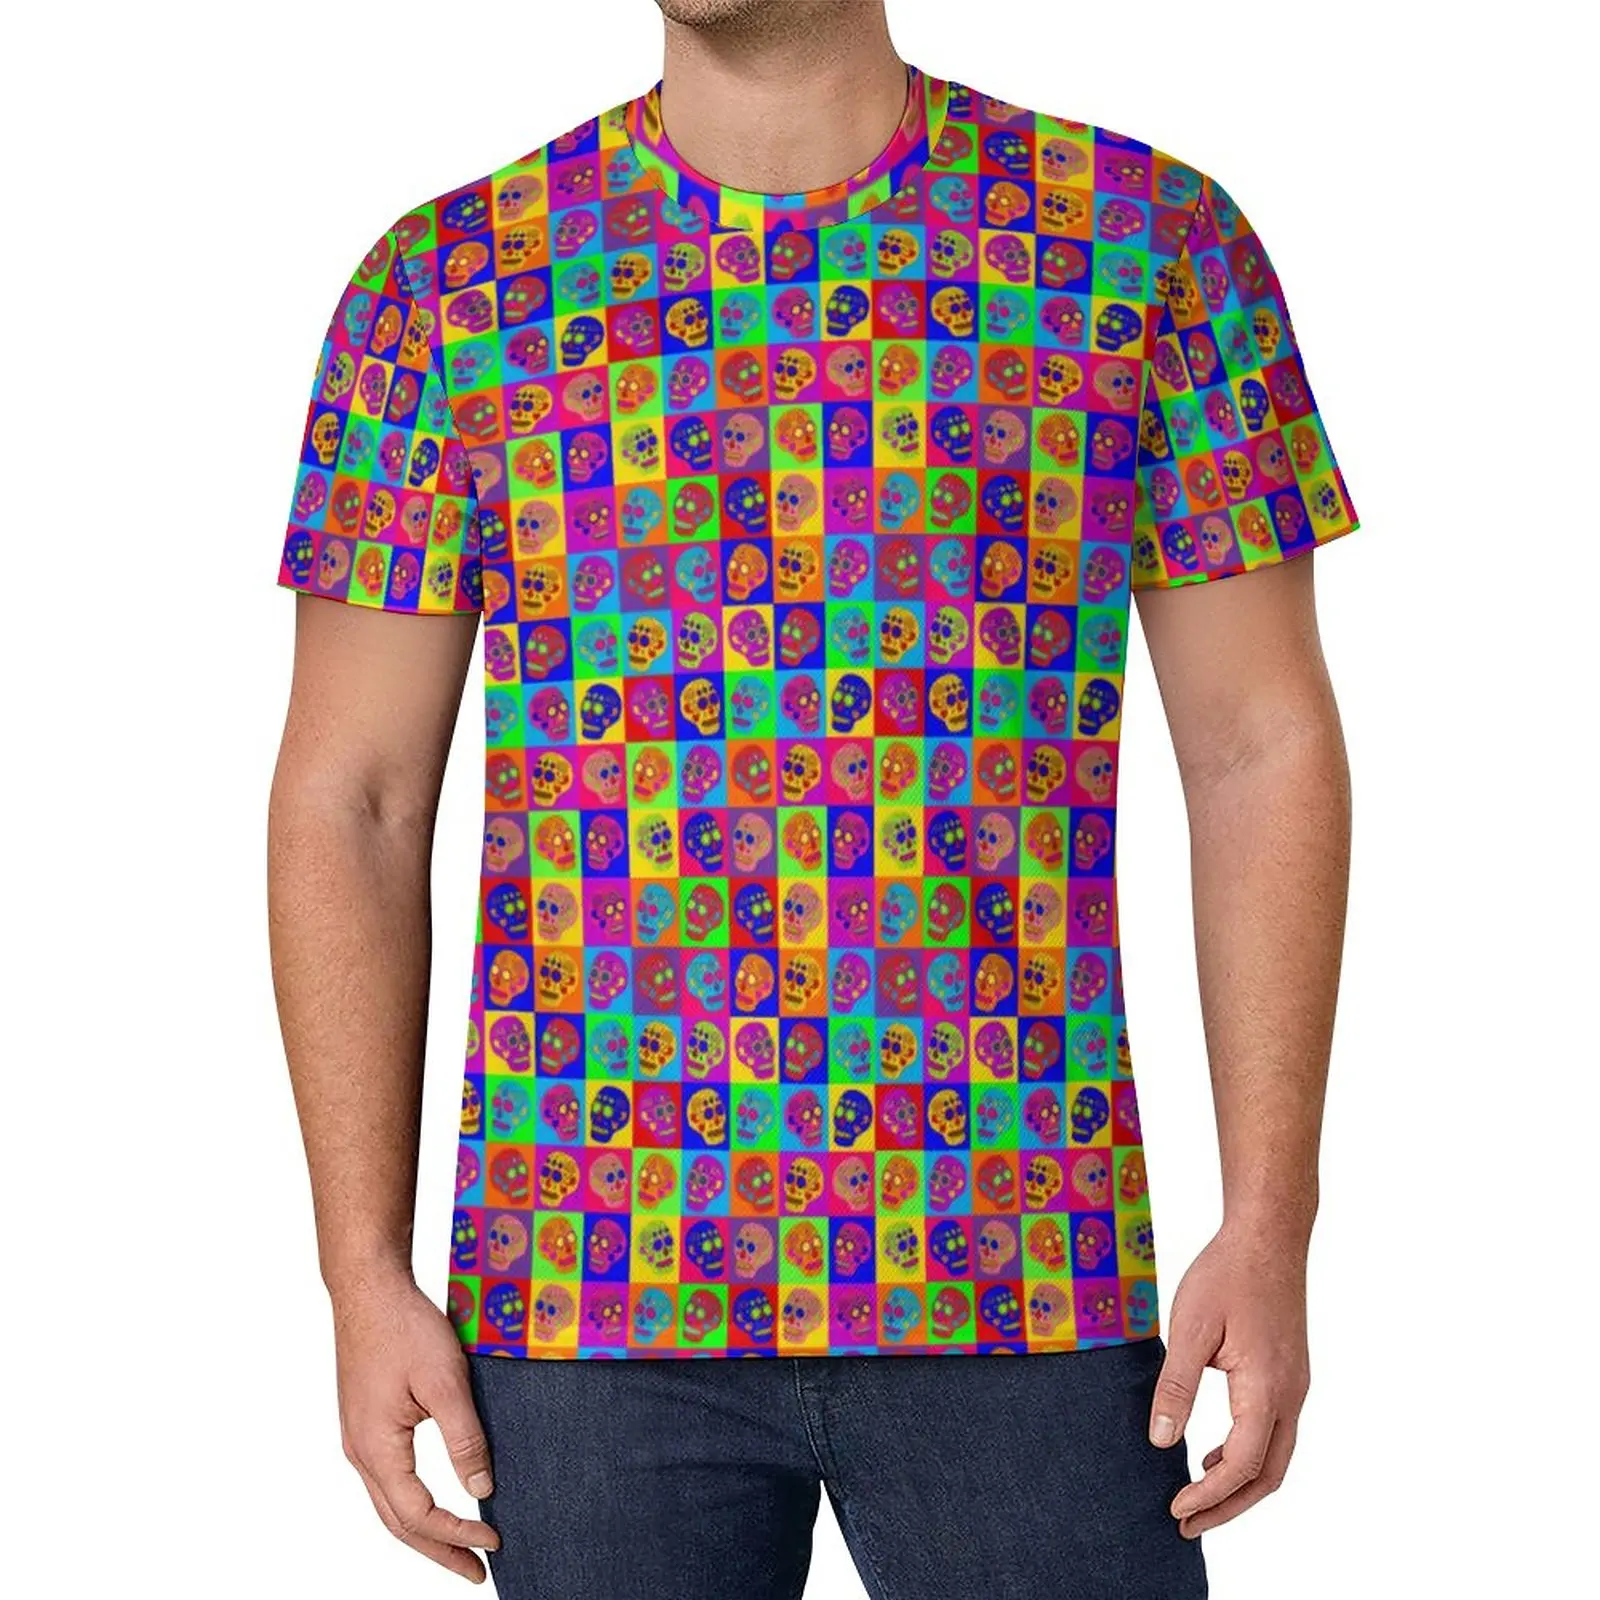 

Sugar Skull Squares T-Shirt Day of The Dead Vintage T-Shirts Summer Design Tees Fun Clothing Plus Size